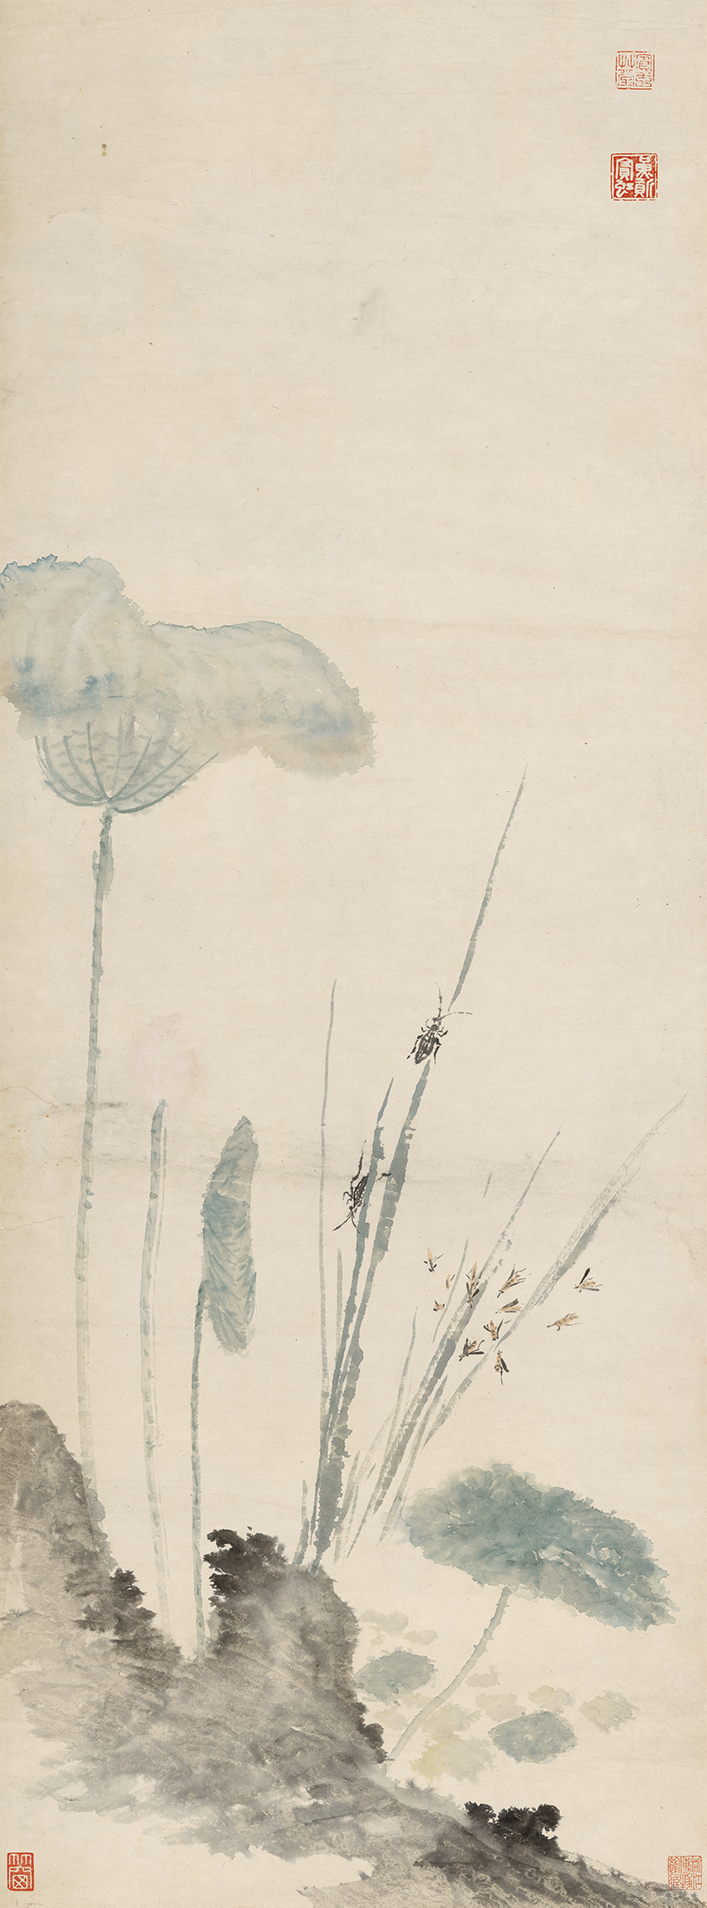 Huang Binhong, Lotus Pond Autumn Interesting Scroll, Collection of Zhejiang Provincial Museum, coloring on paper, vertical 106.6 cm, horizontal 39.9 cm